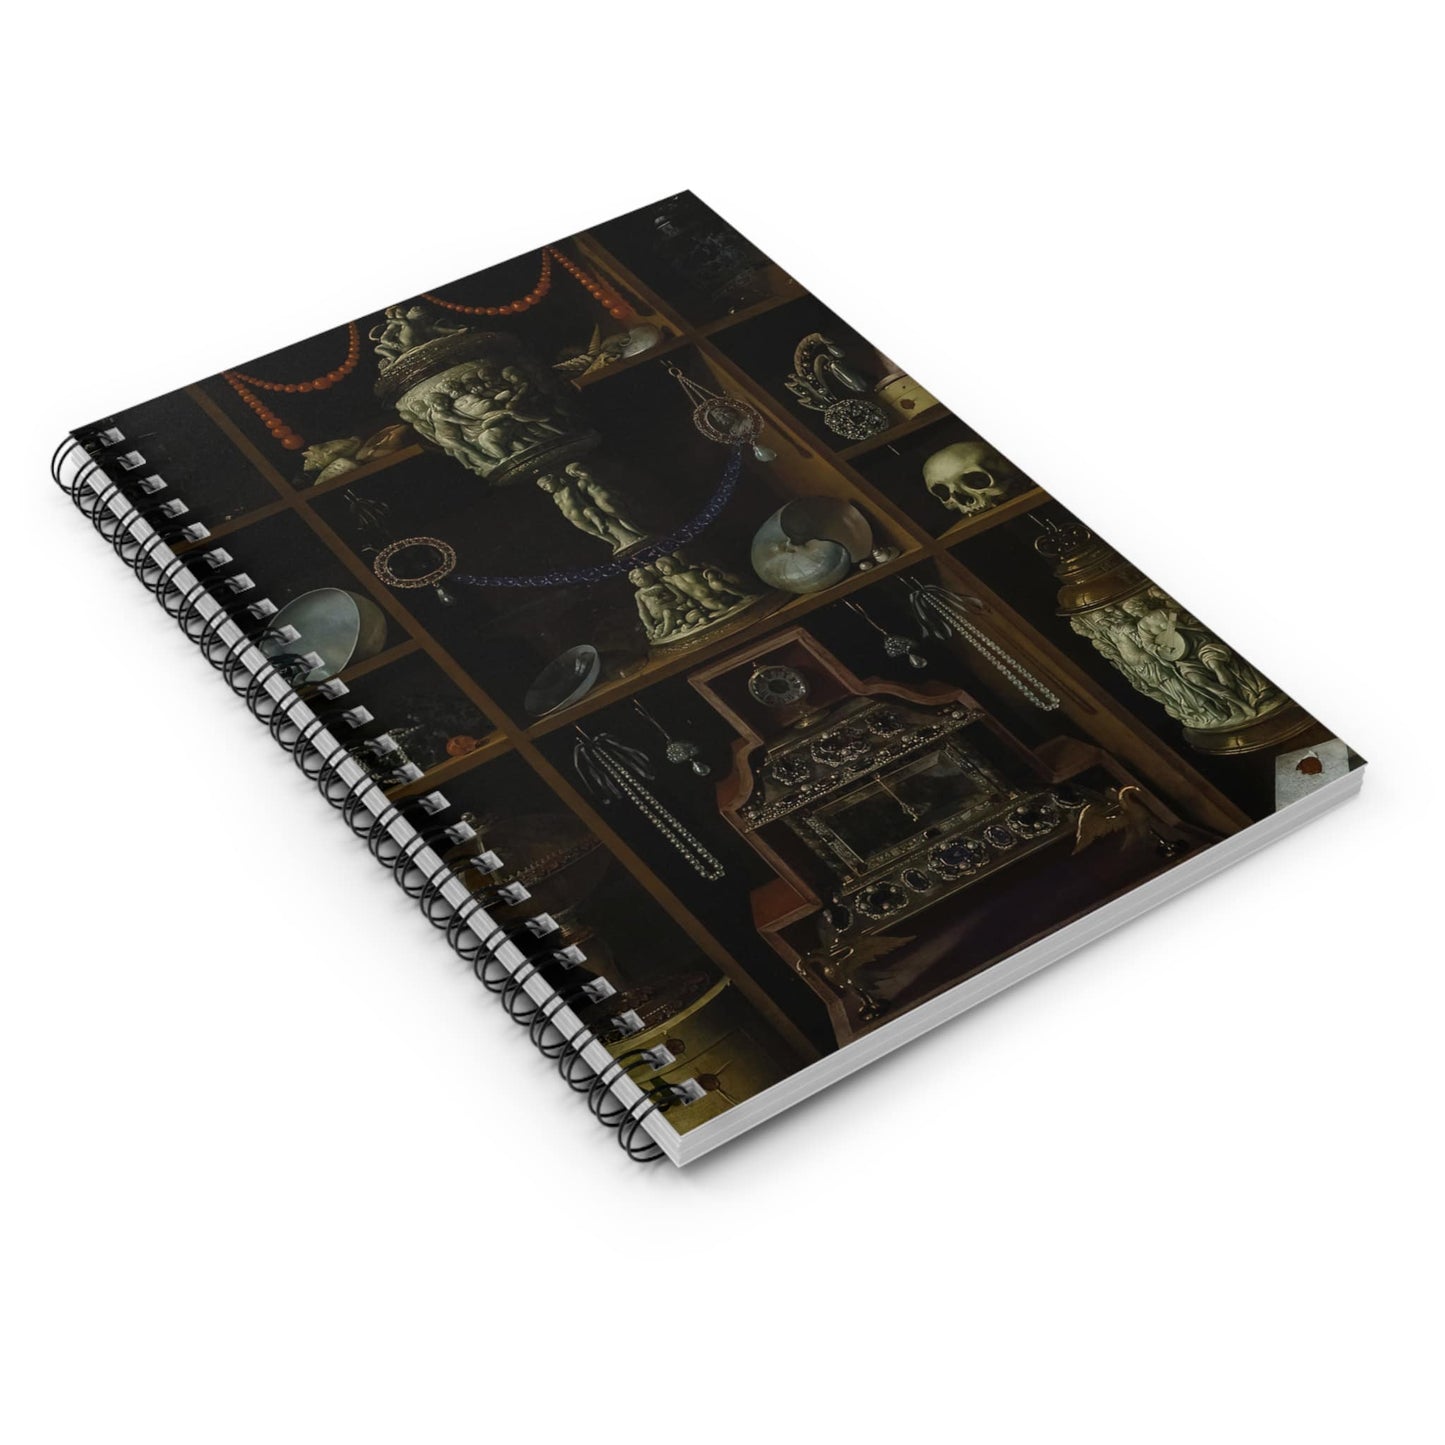 Dark Academia Aesthetic Spiral Notebook Laying Flat on White Surface